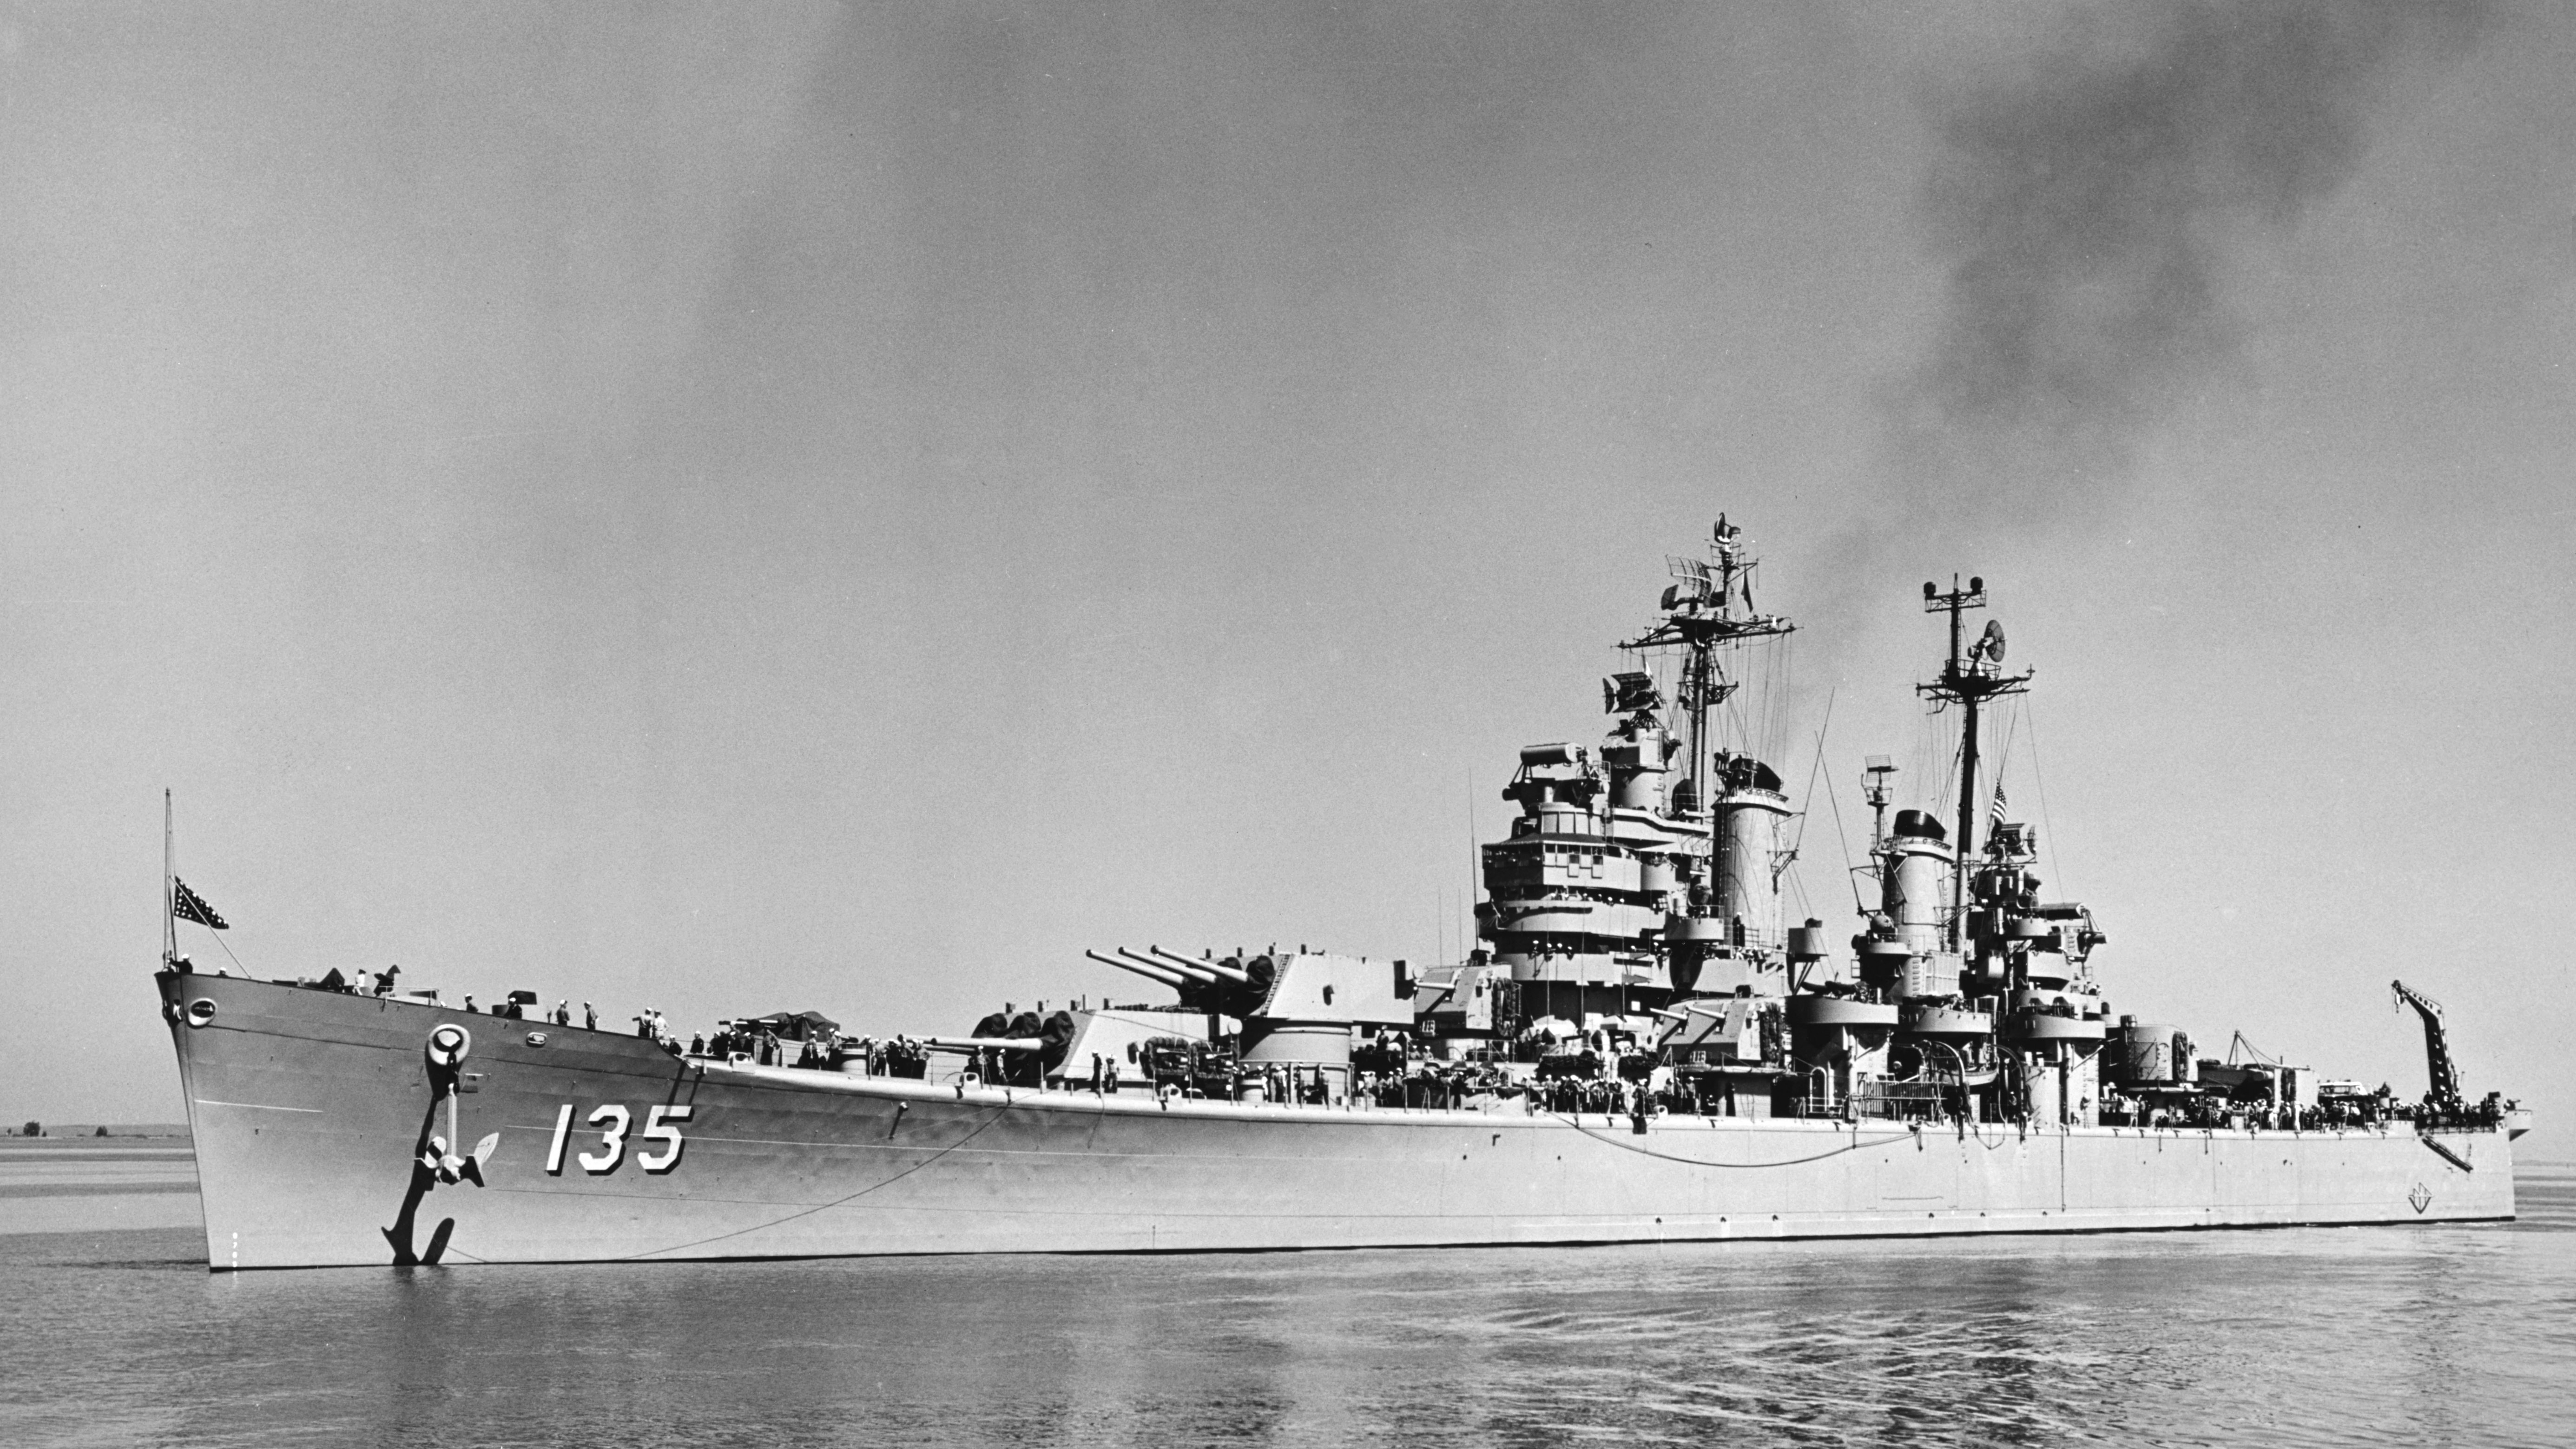 The USS Los Angeles is a Heavy Battle Cruiser on which Bill Rector was deployed; Credit: Bill Rector, WSIU.